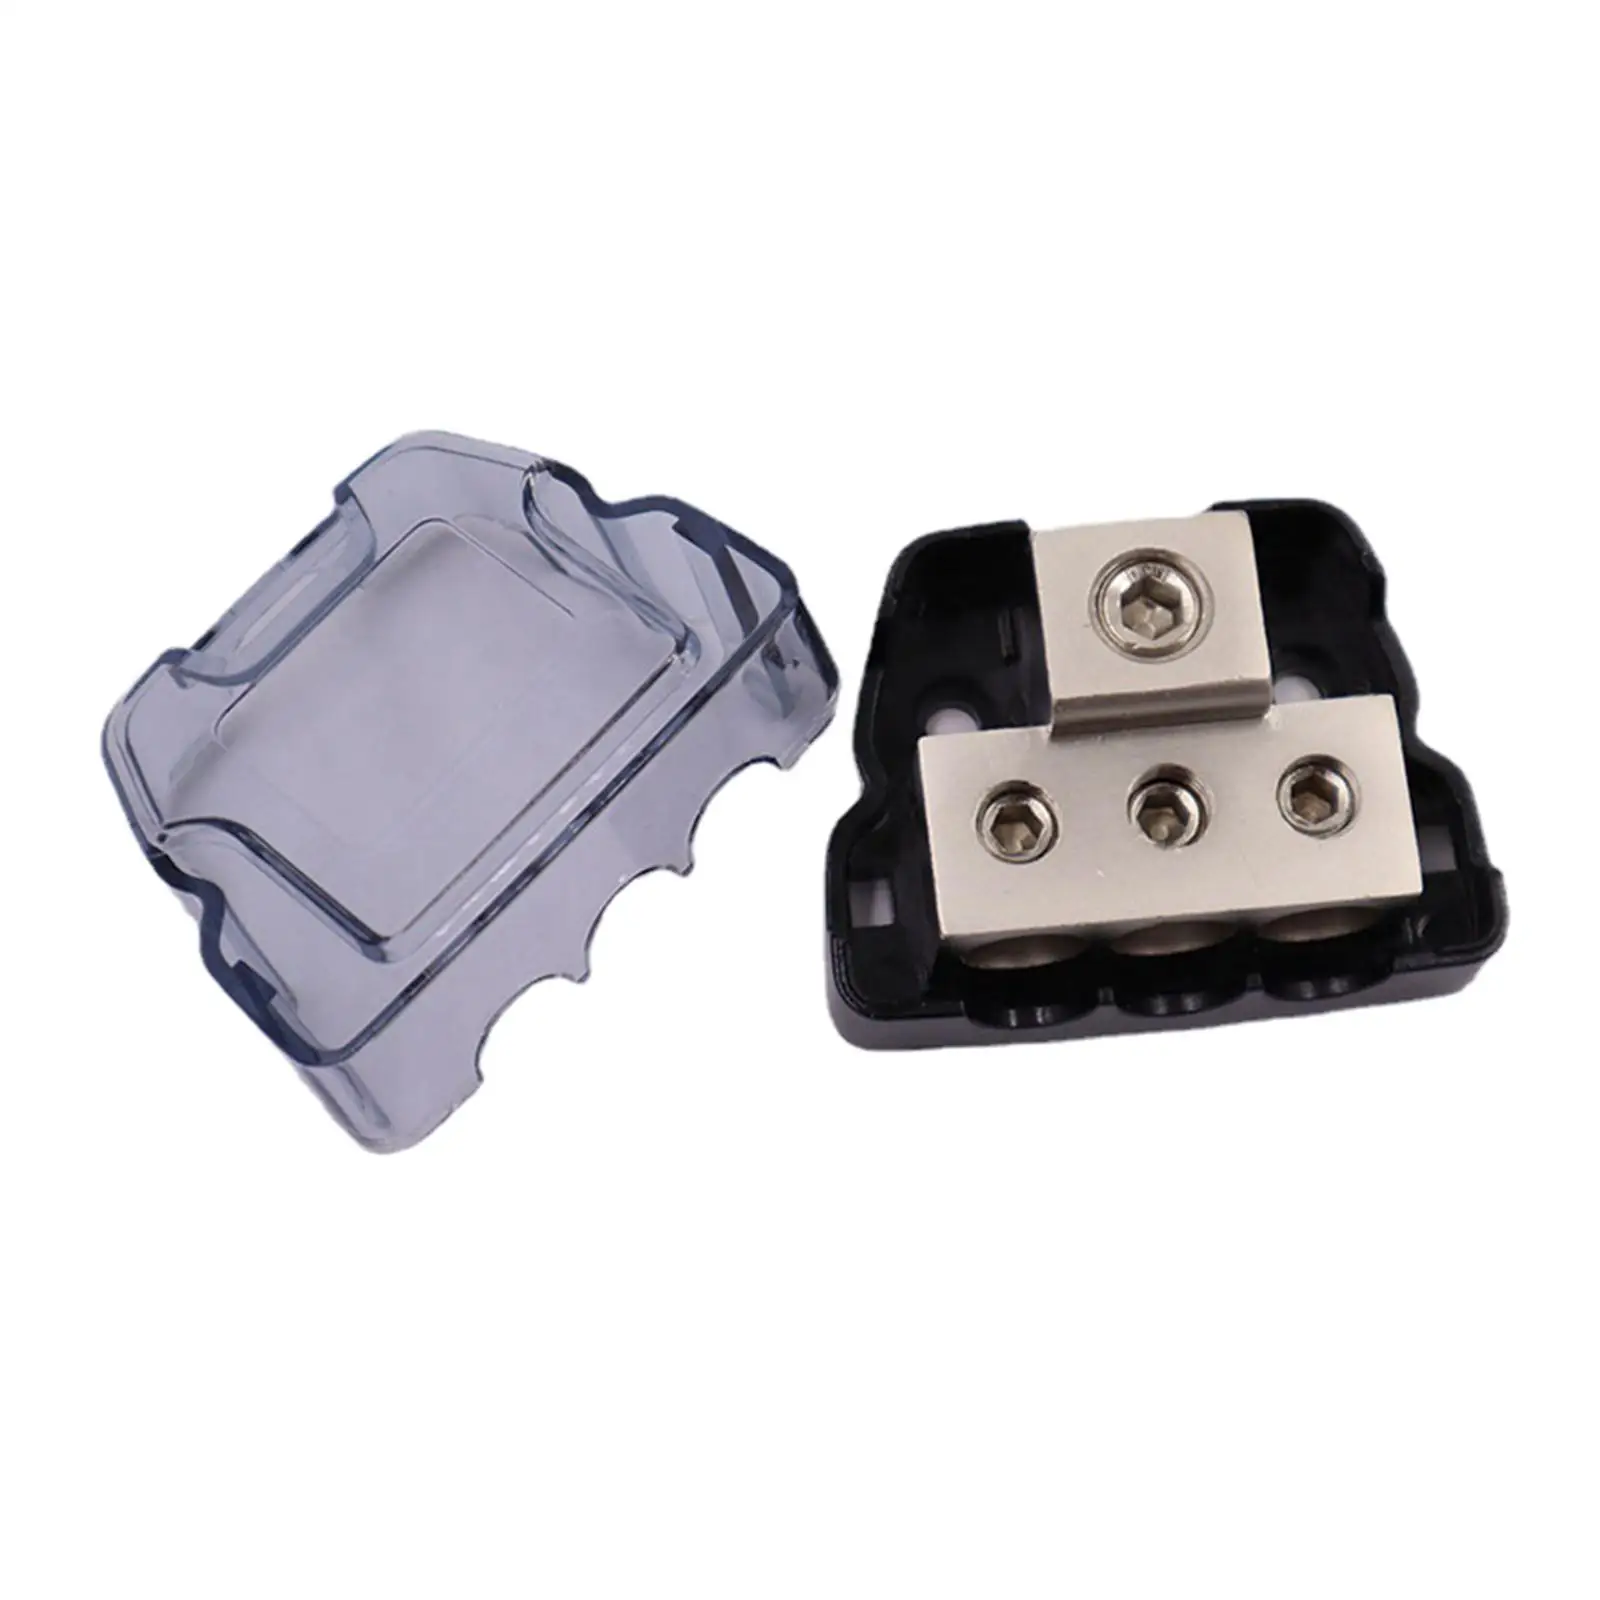 Power Distribution Block, 3 Way 1 in 3 Out Distribution Blocks,